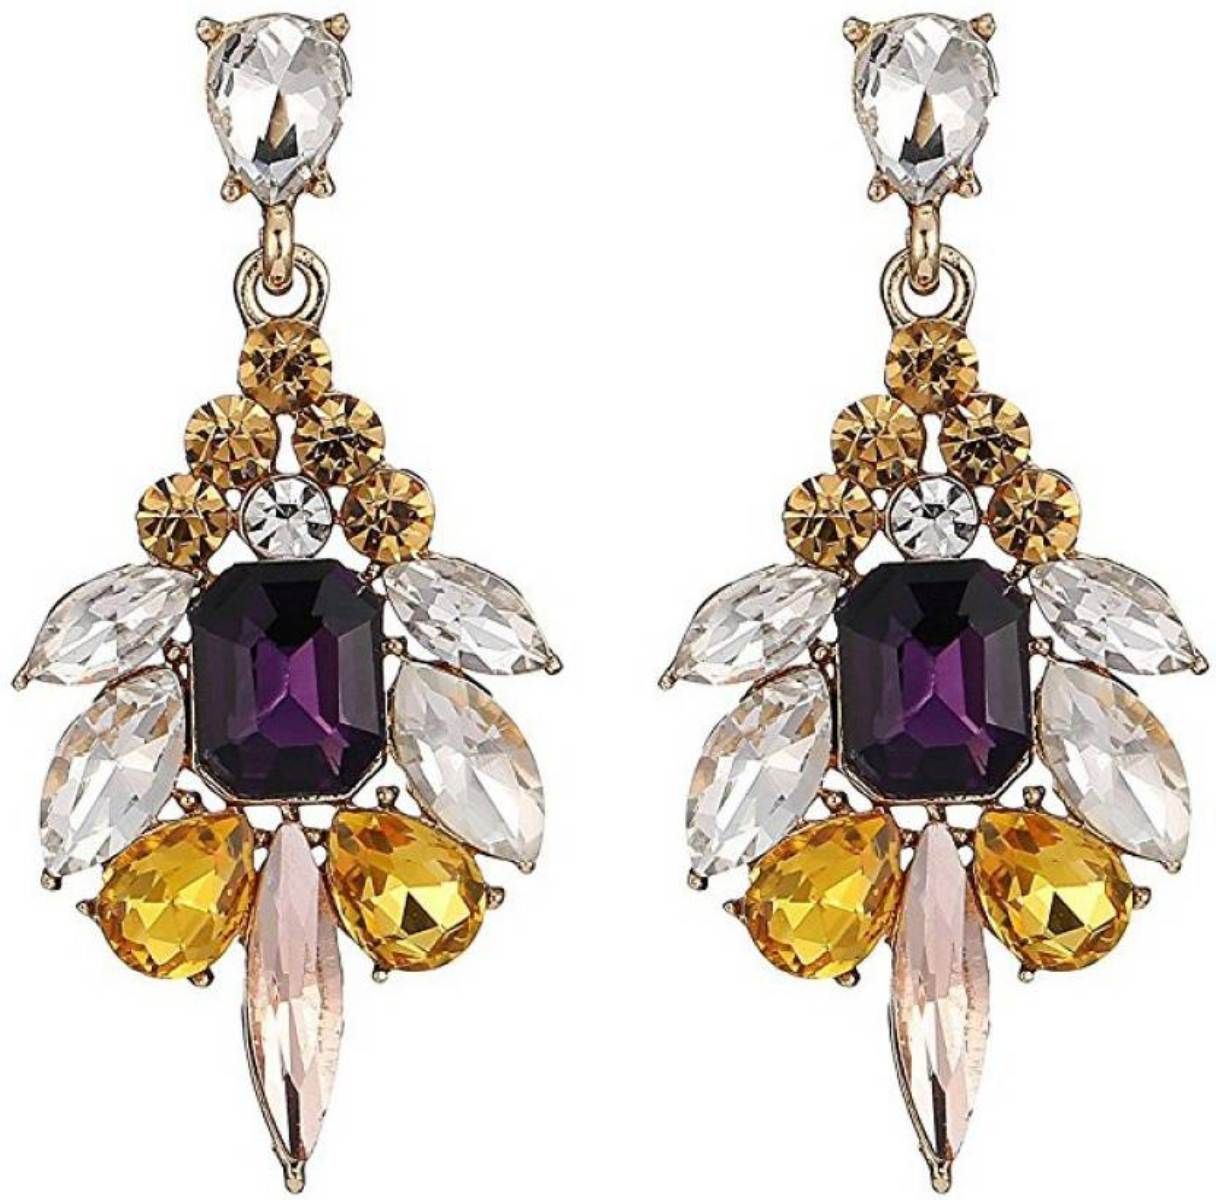 Buy Crunchy Fashion Multi-colored Crystal Drop Earrings - Purplle